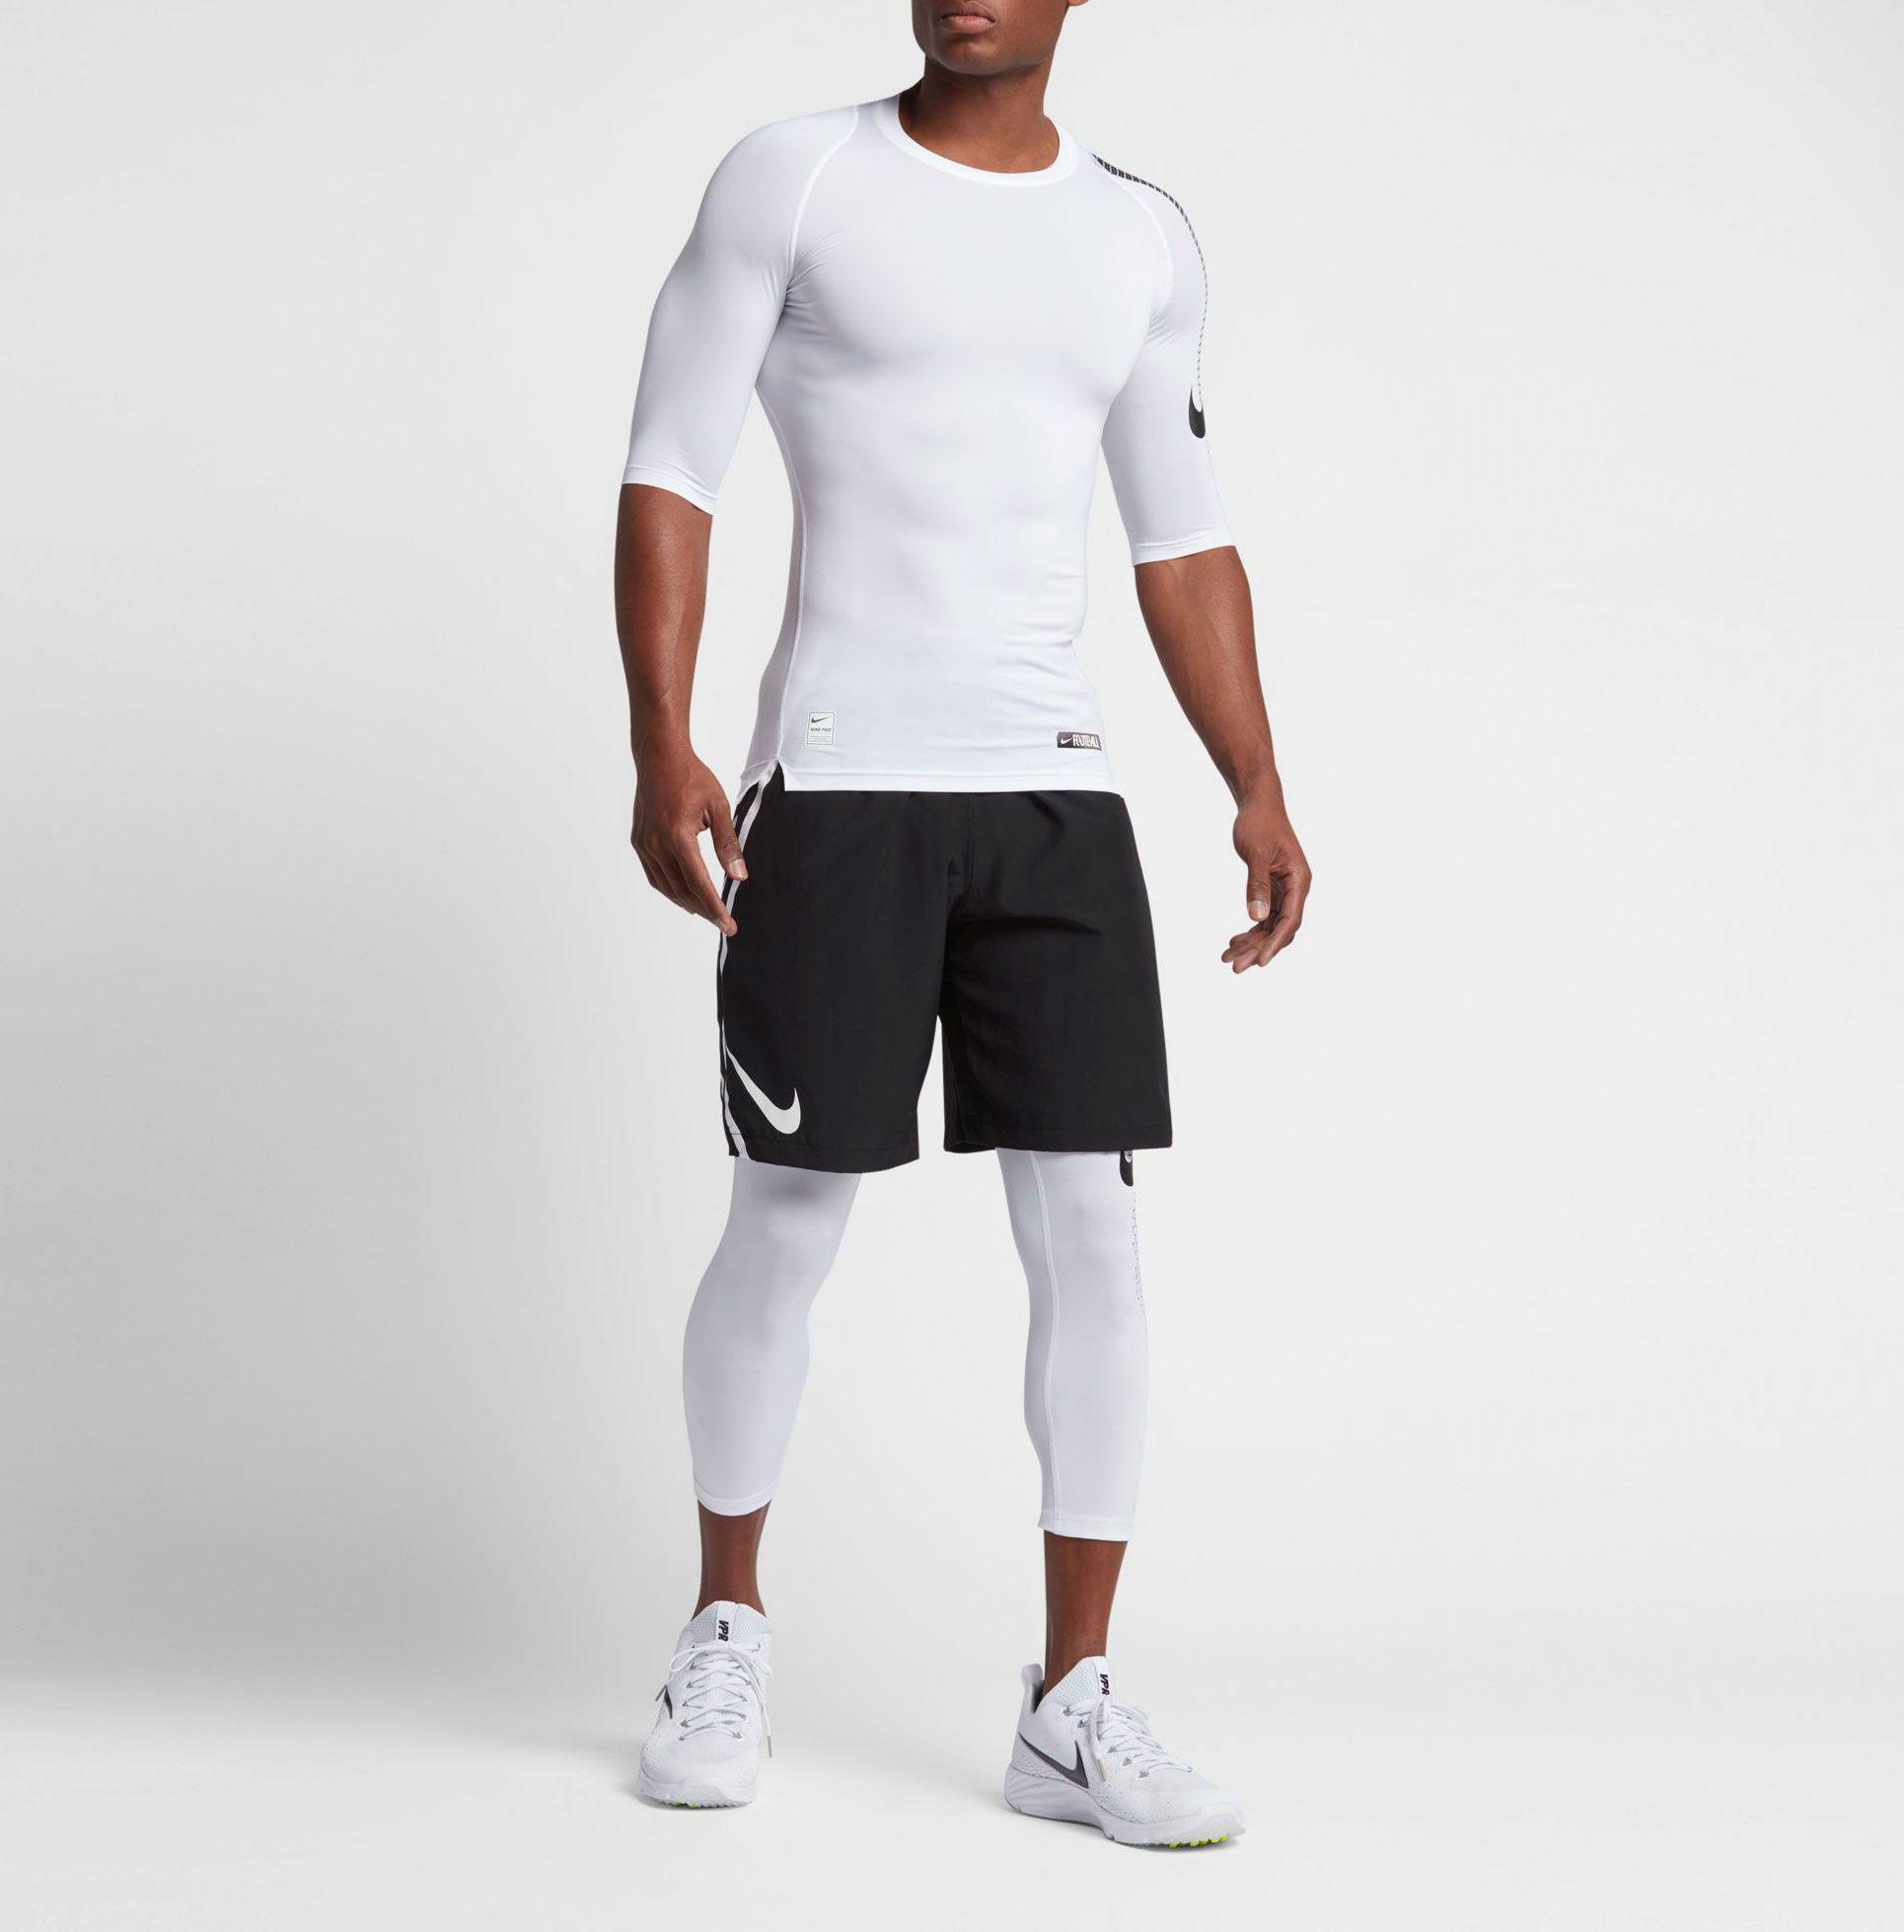 Nike Synthetic Pro Half Sleeve Compression Football Shirt in White/Pale  Grey (White) for Men | Lyst